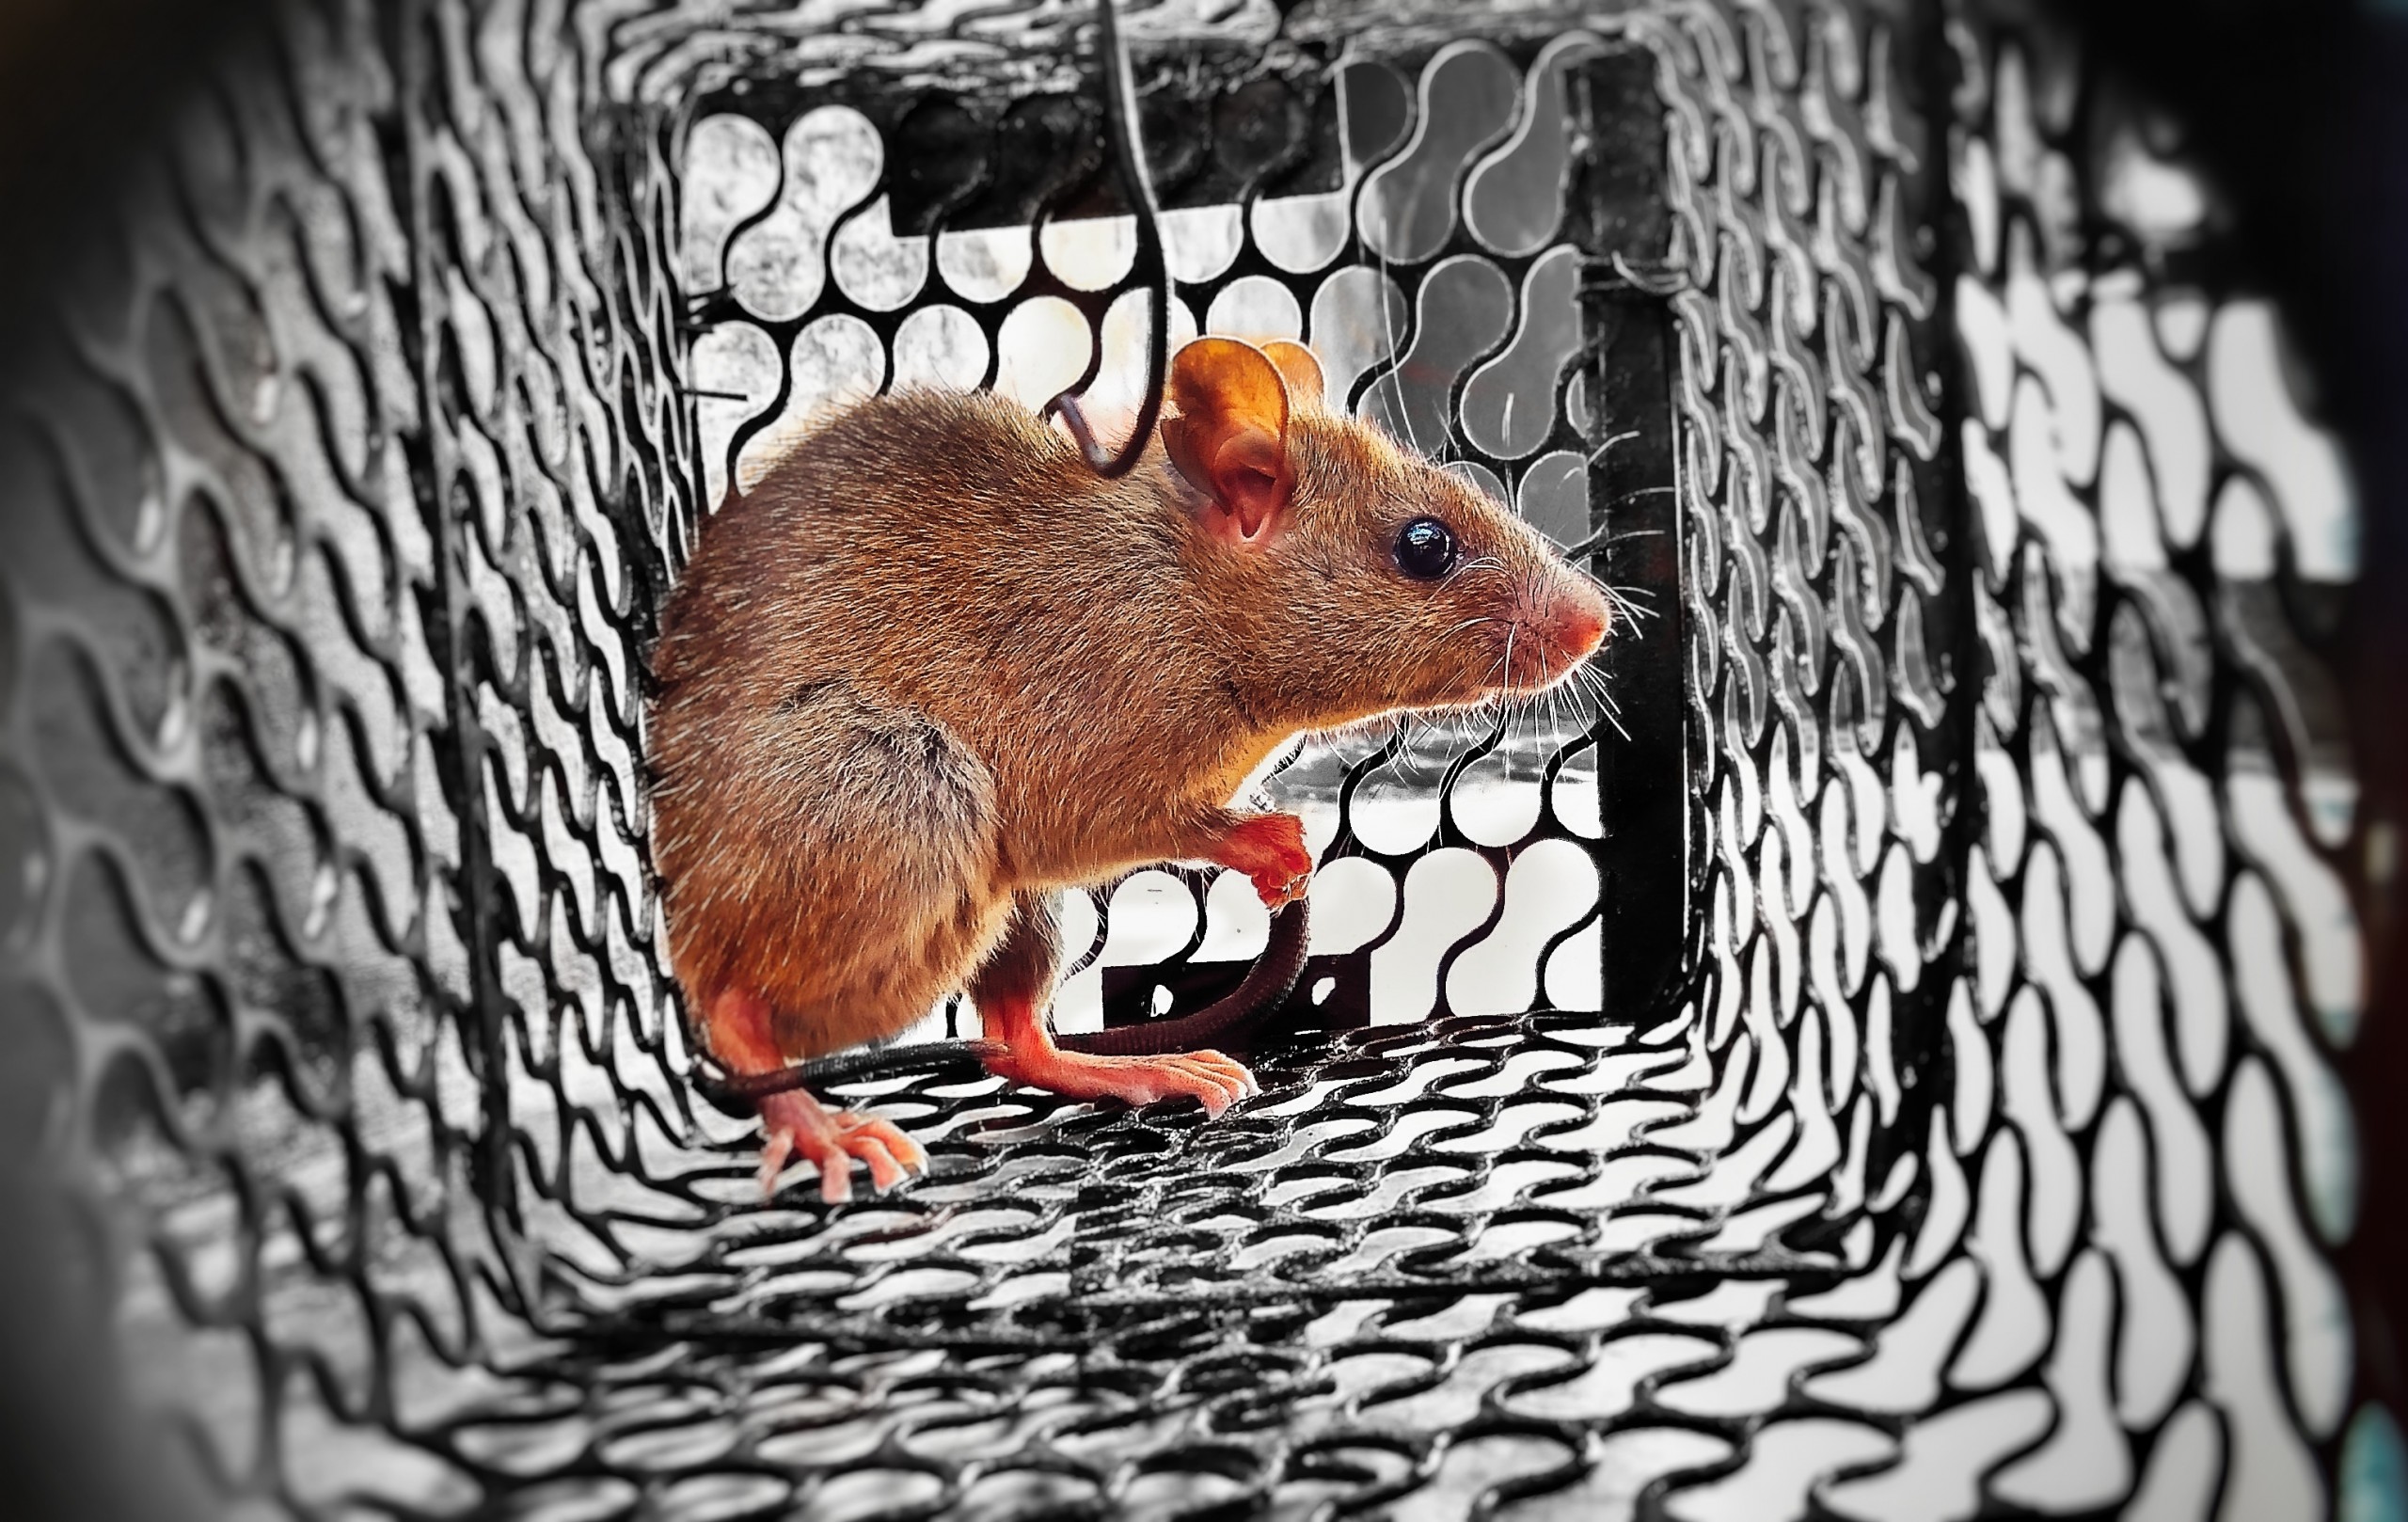 A rat in a cage